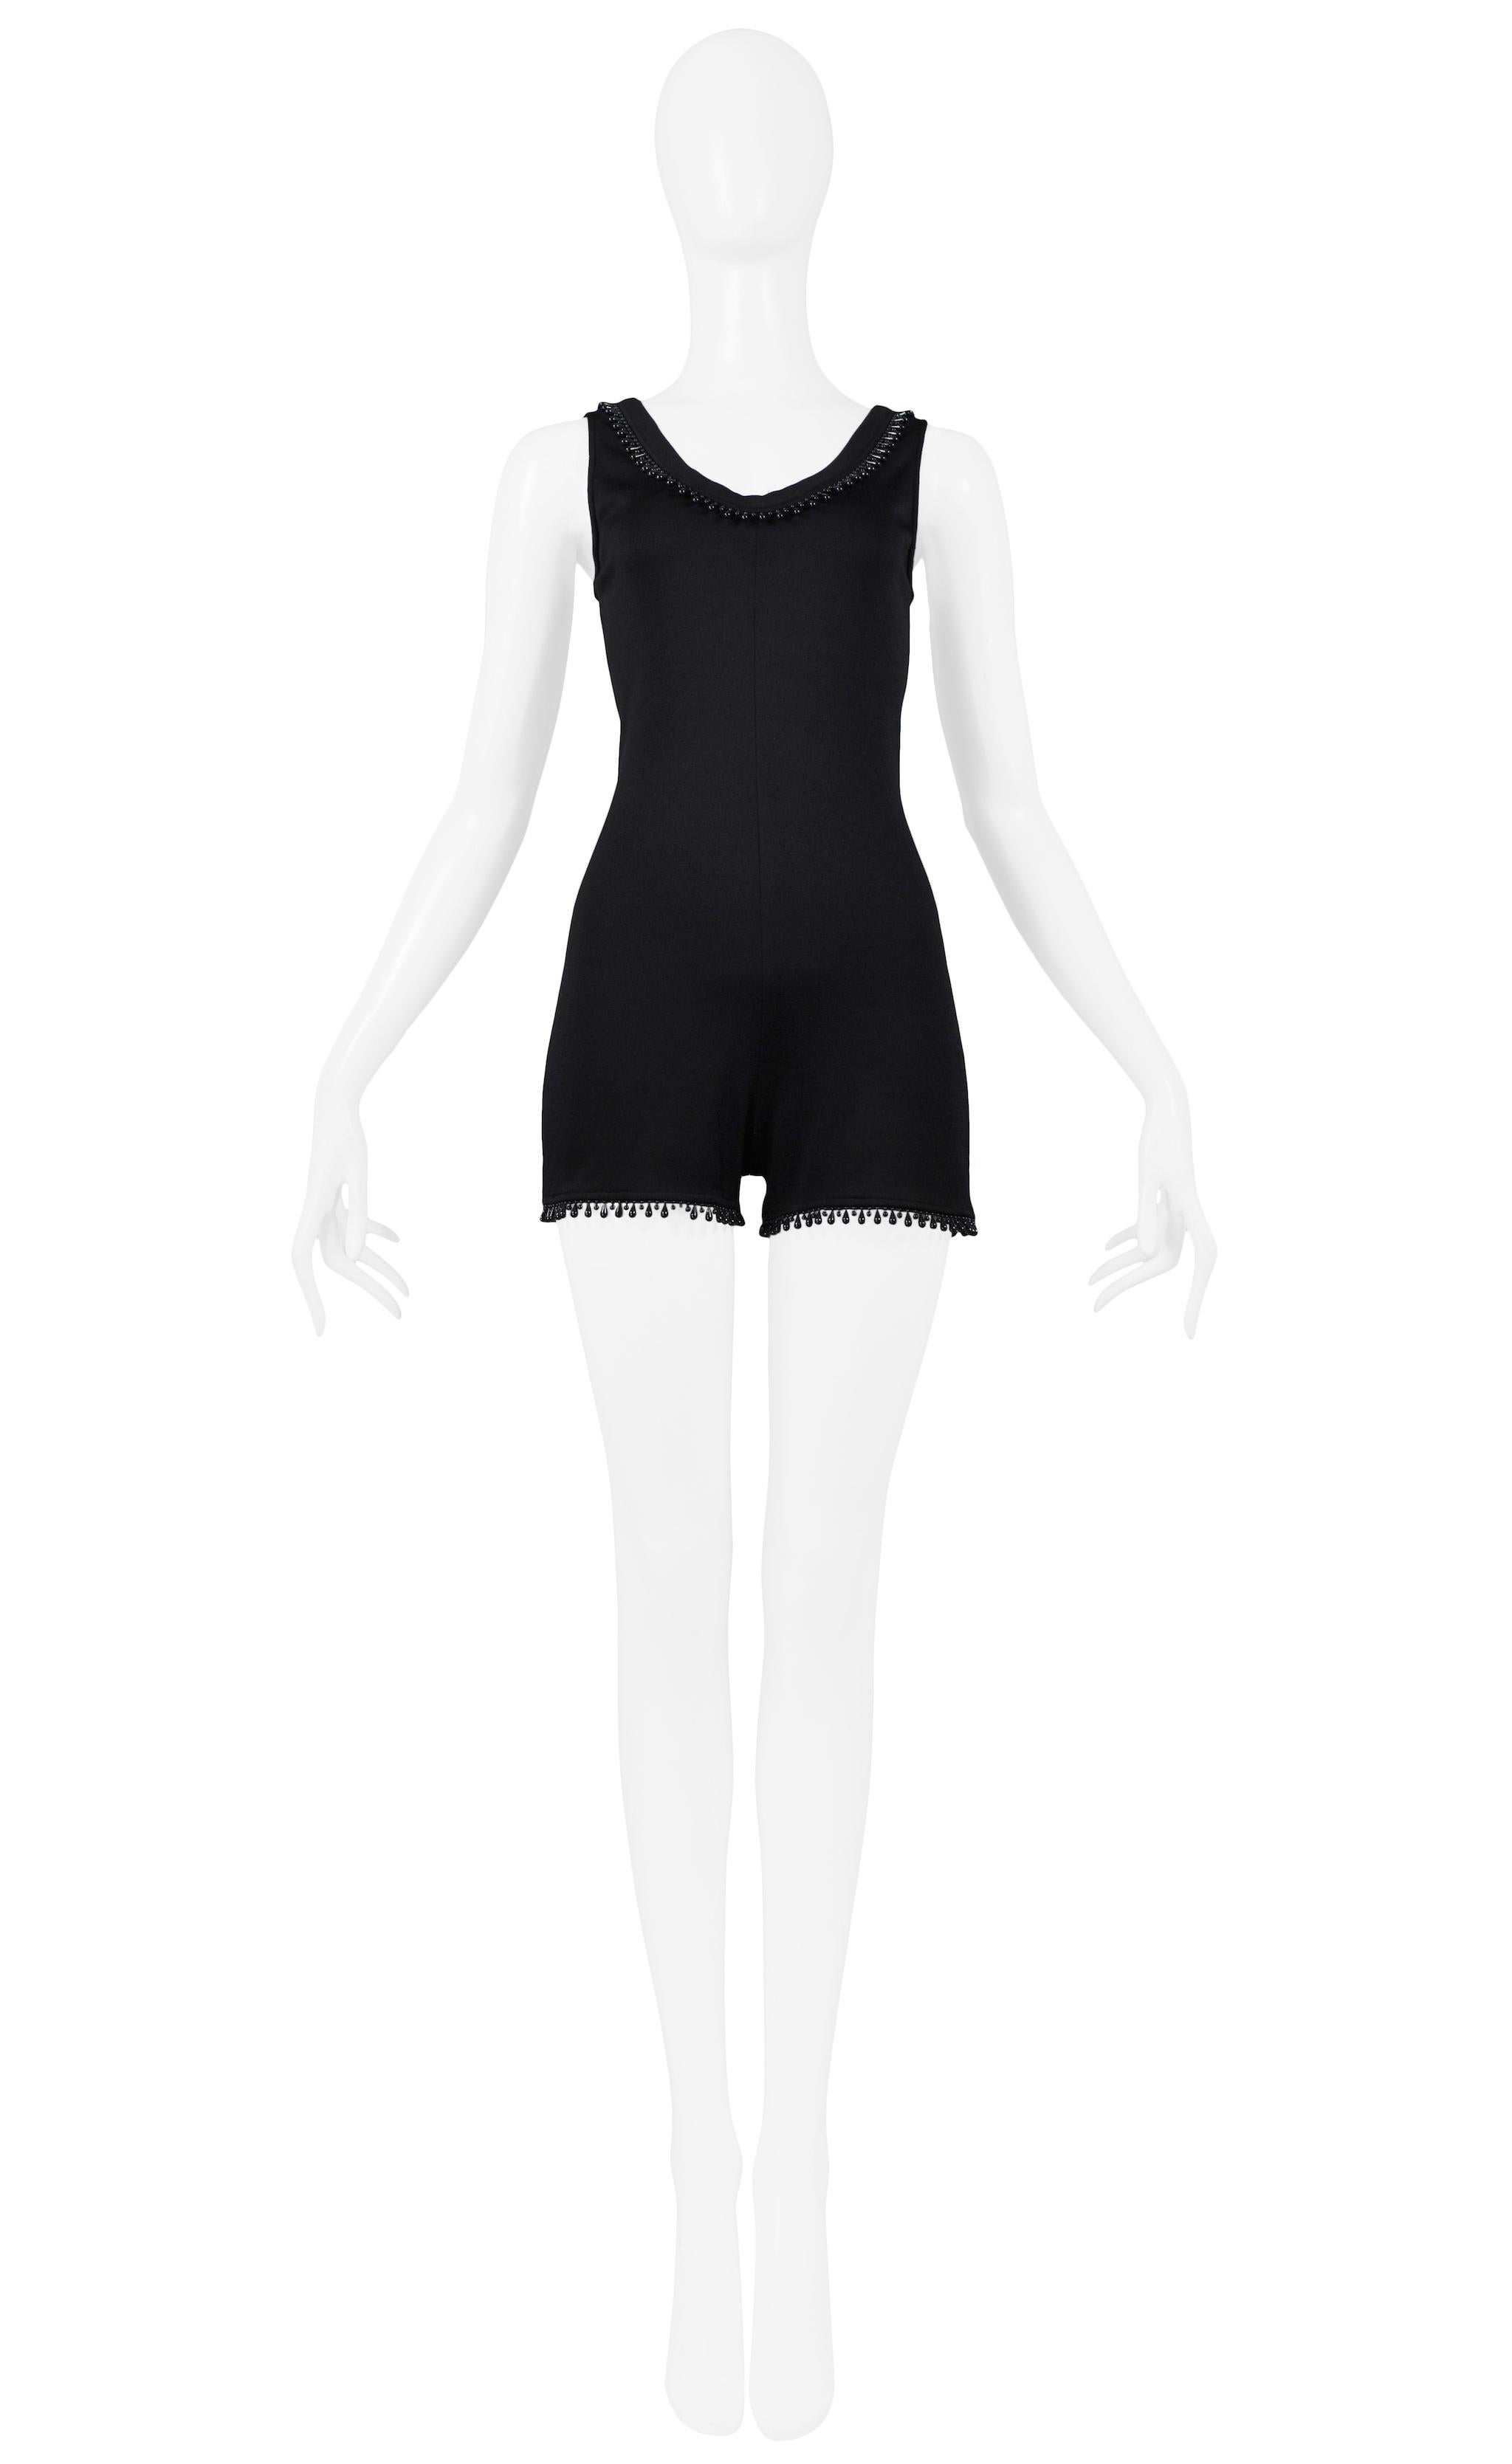 Resurrection Vintage is excited to offer a Byblos black cotton jersey knit sleeveless romper with black teardrop beading along neckline and hem. 
Byblos
Designed by Alan Cleaver and Keith Varty
Size Small / Medium
Jersey Knit
1992